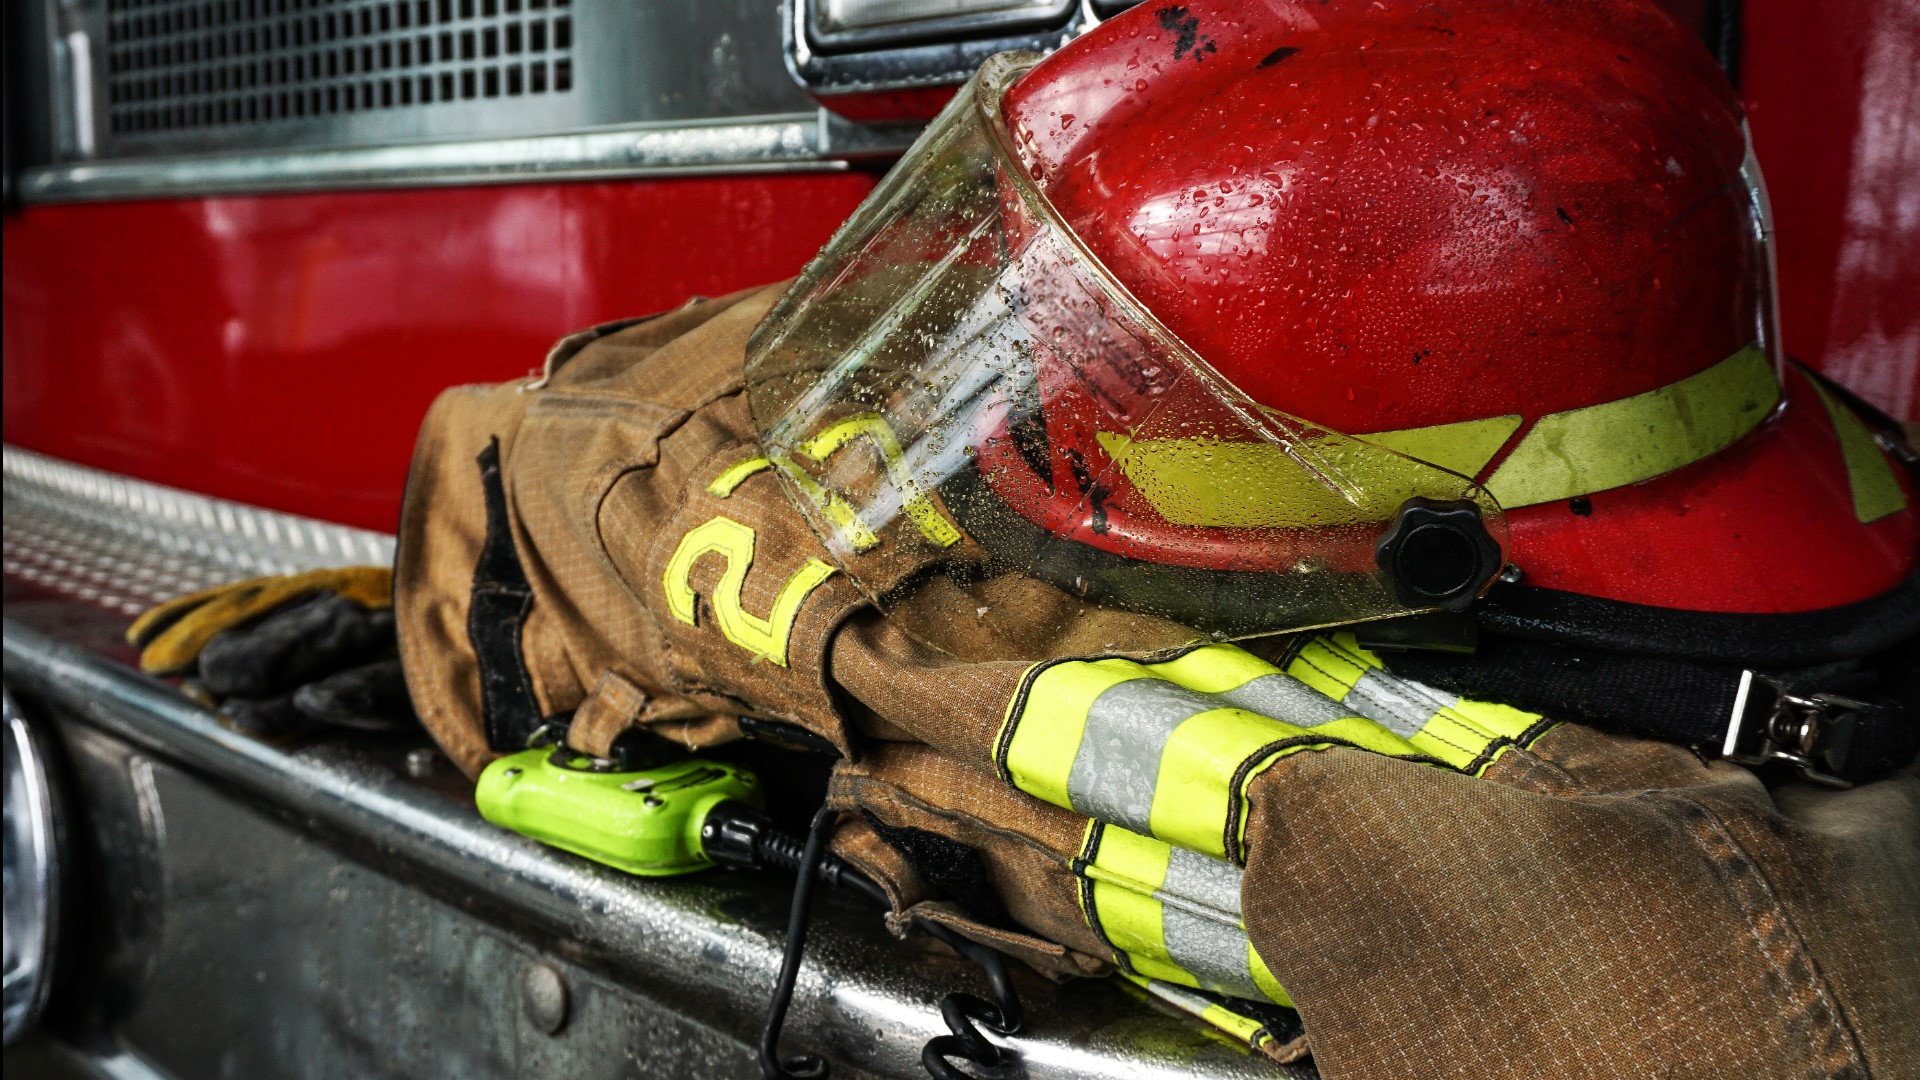 Firefighters are keeping an eye on another potential risk for cancer while on the job - their own gear.